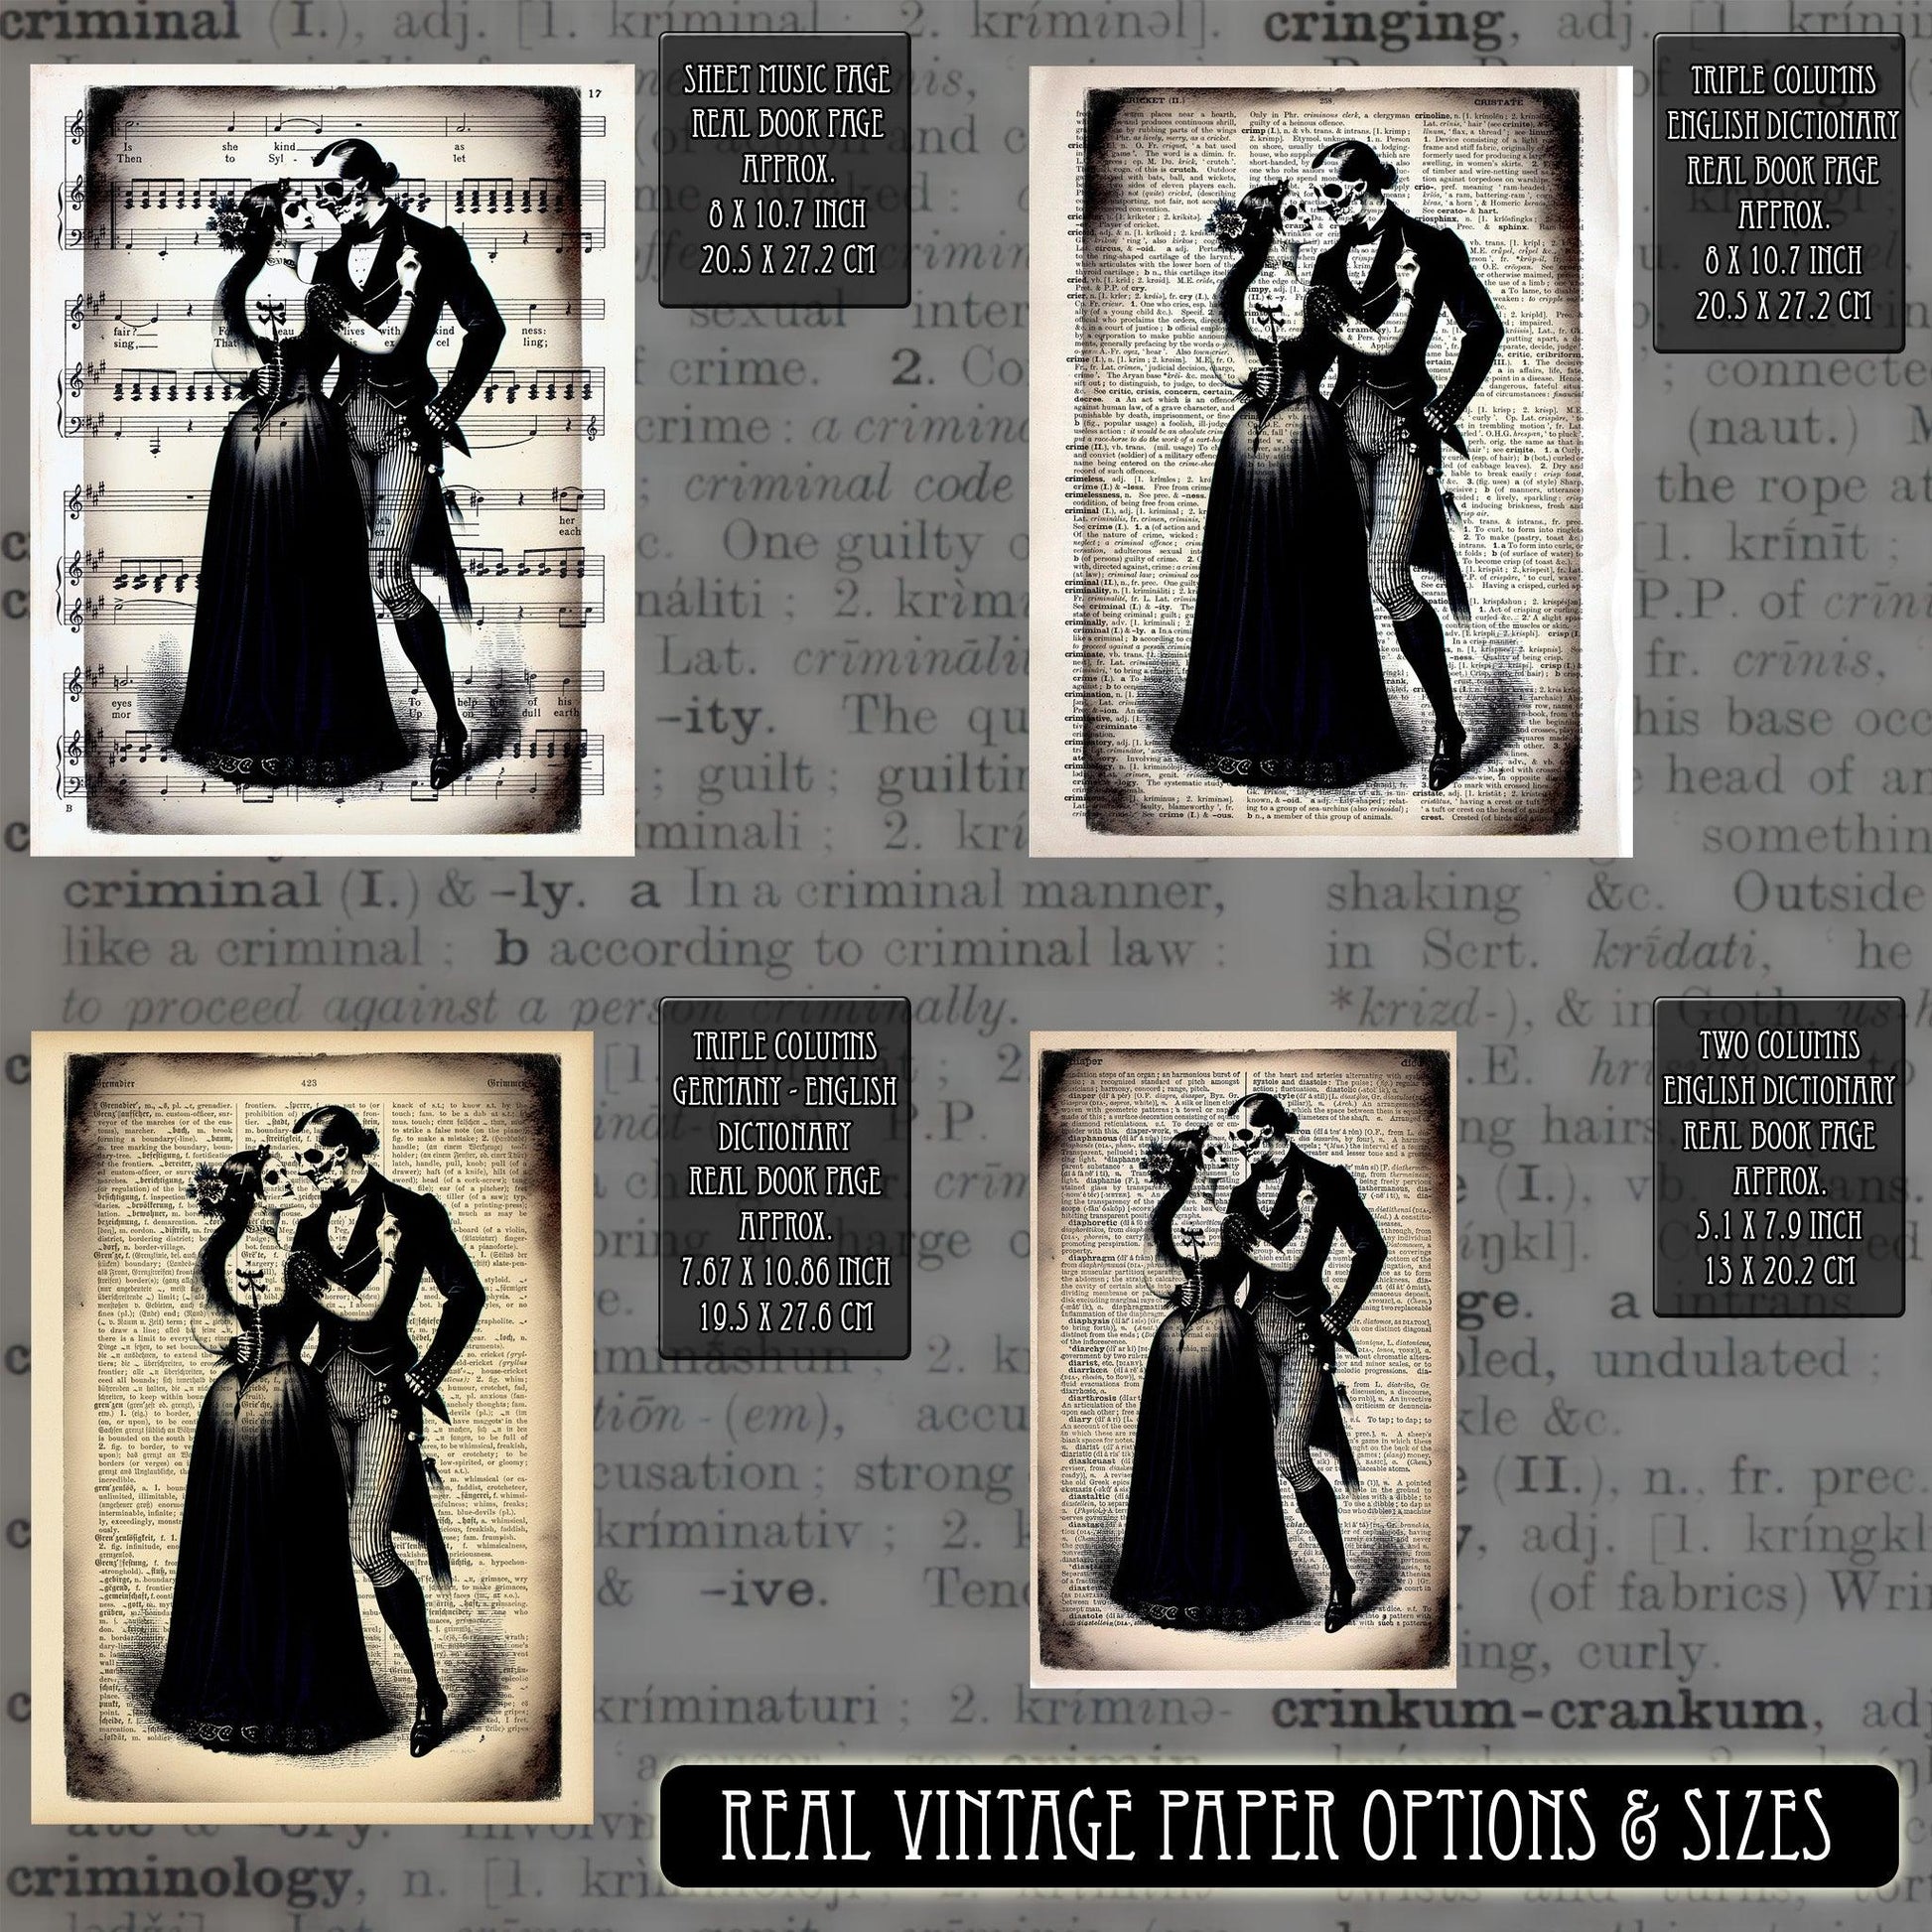 Dancing Skeletons Embrace Lovers: Victorian Gothic Decor and Dark Romance Art on Vintage Dictionary Page - ArtCursor